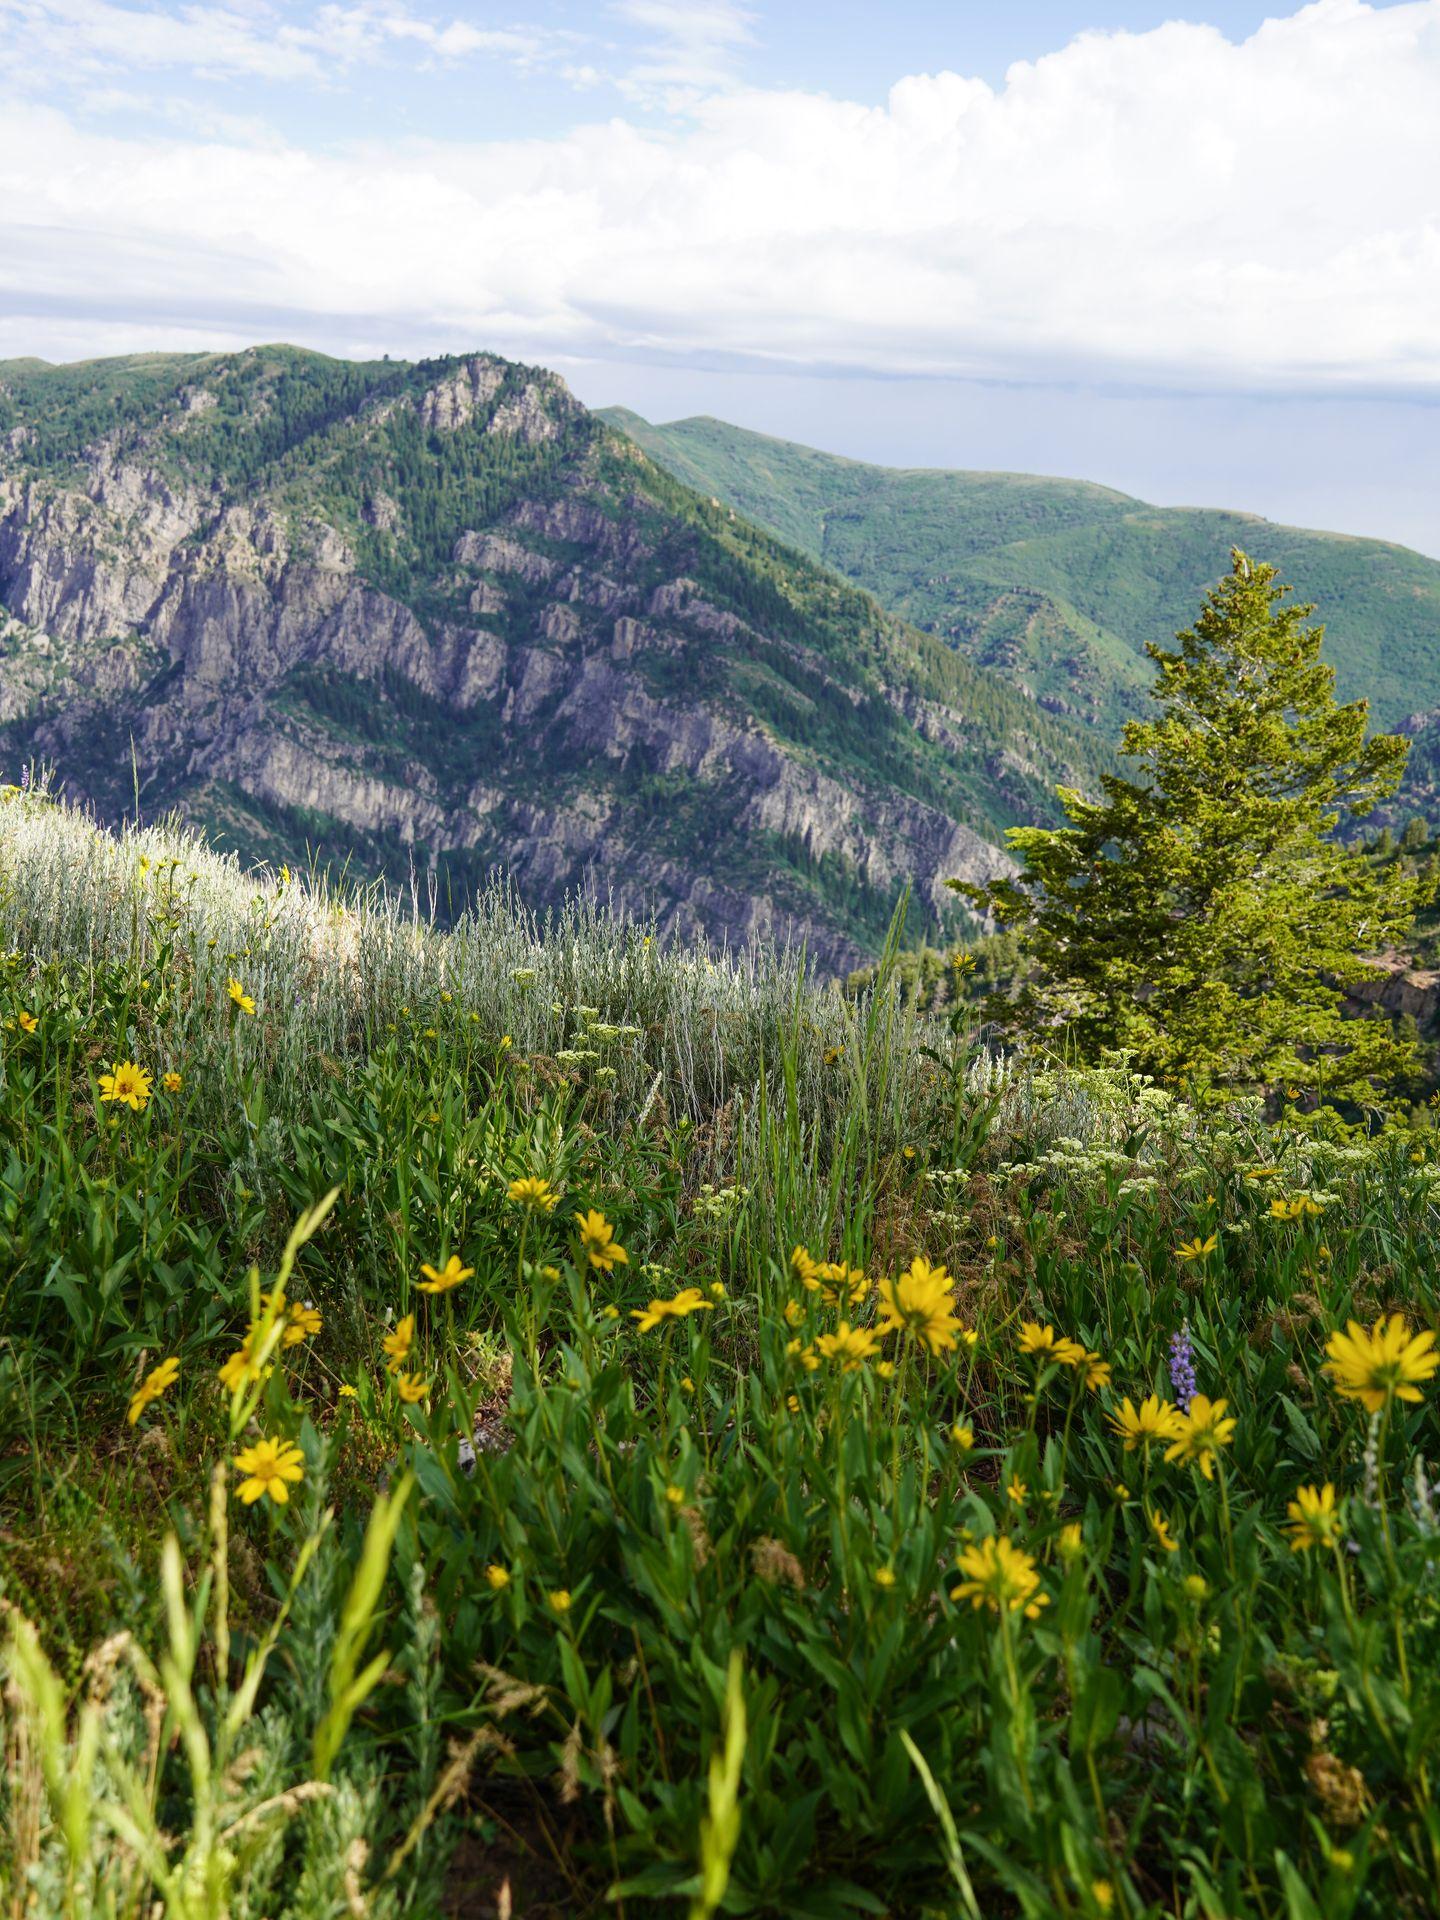 A view of a mountain with green grass and yellow flowers in the foreground.